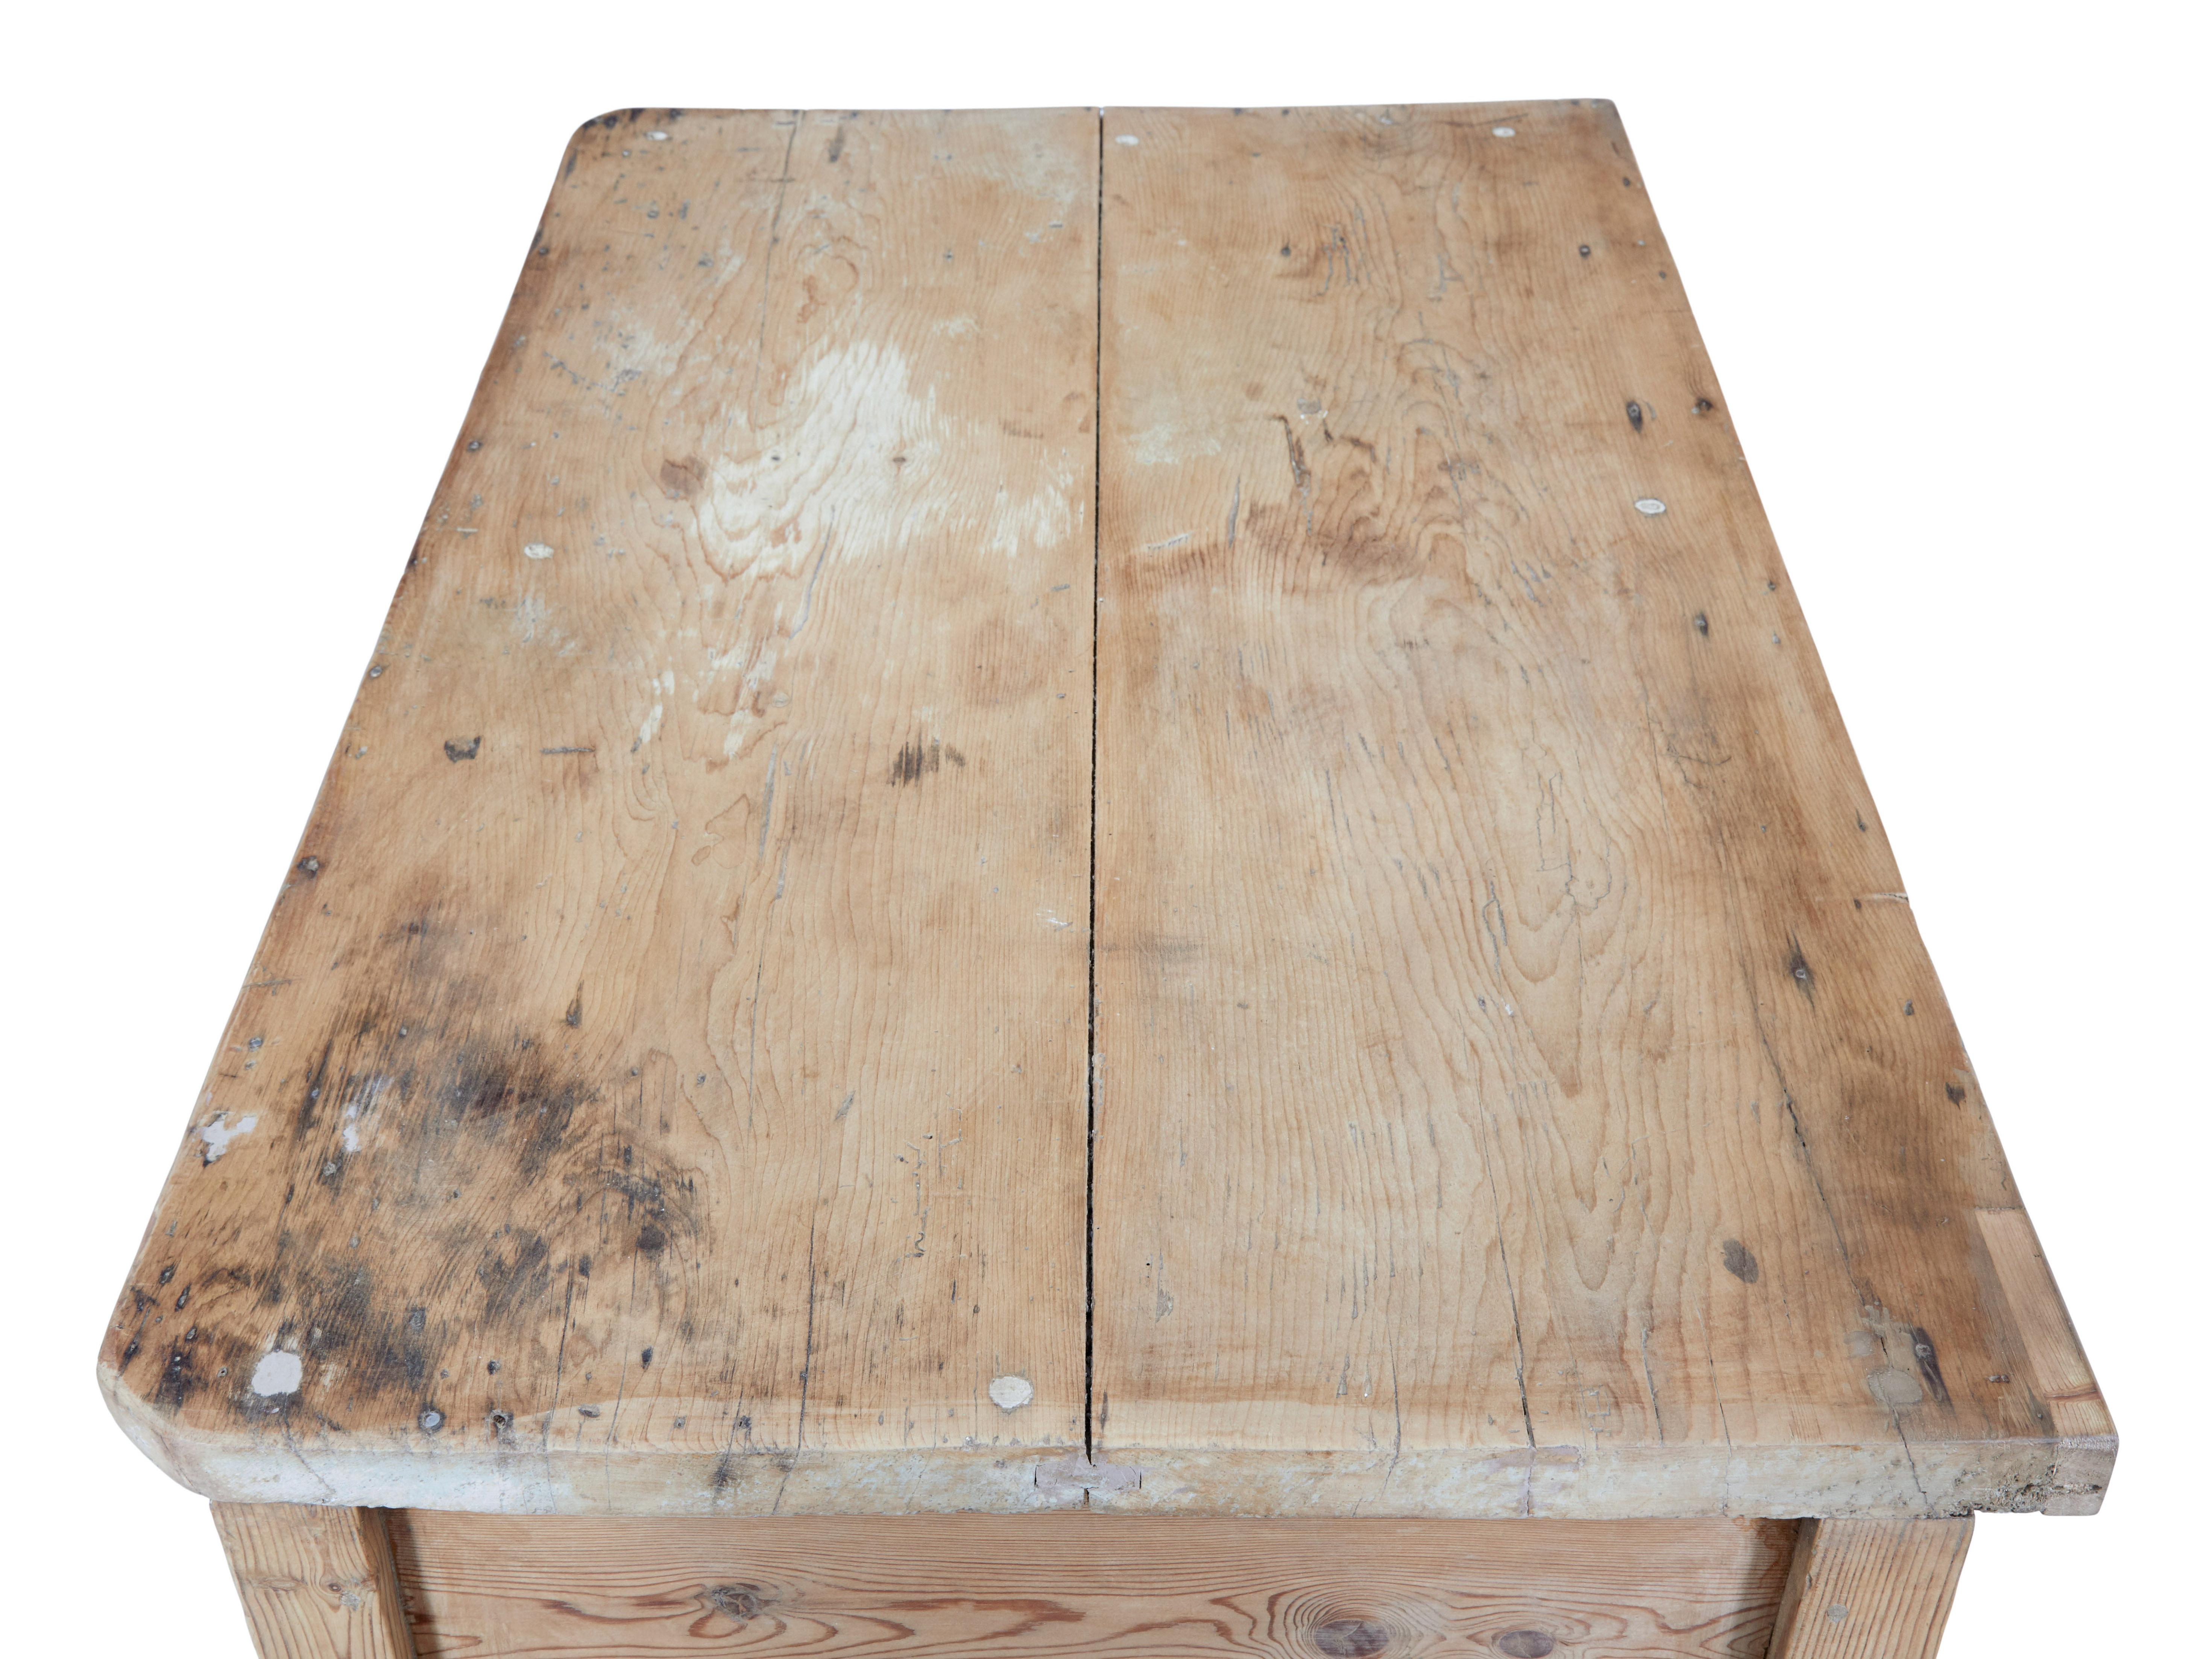 Rustic 19th century Victorian pine kitchen table circa 1880.

Here we present a table that makes and ideal kitchen table or even a desk.  2 plank pine top, with 2 drawers below which are fitted with replaced handles.  Shaped freize above the